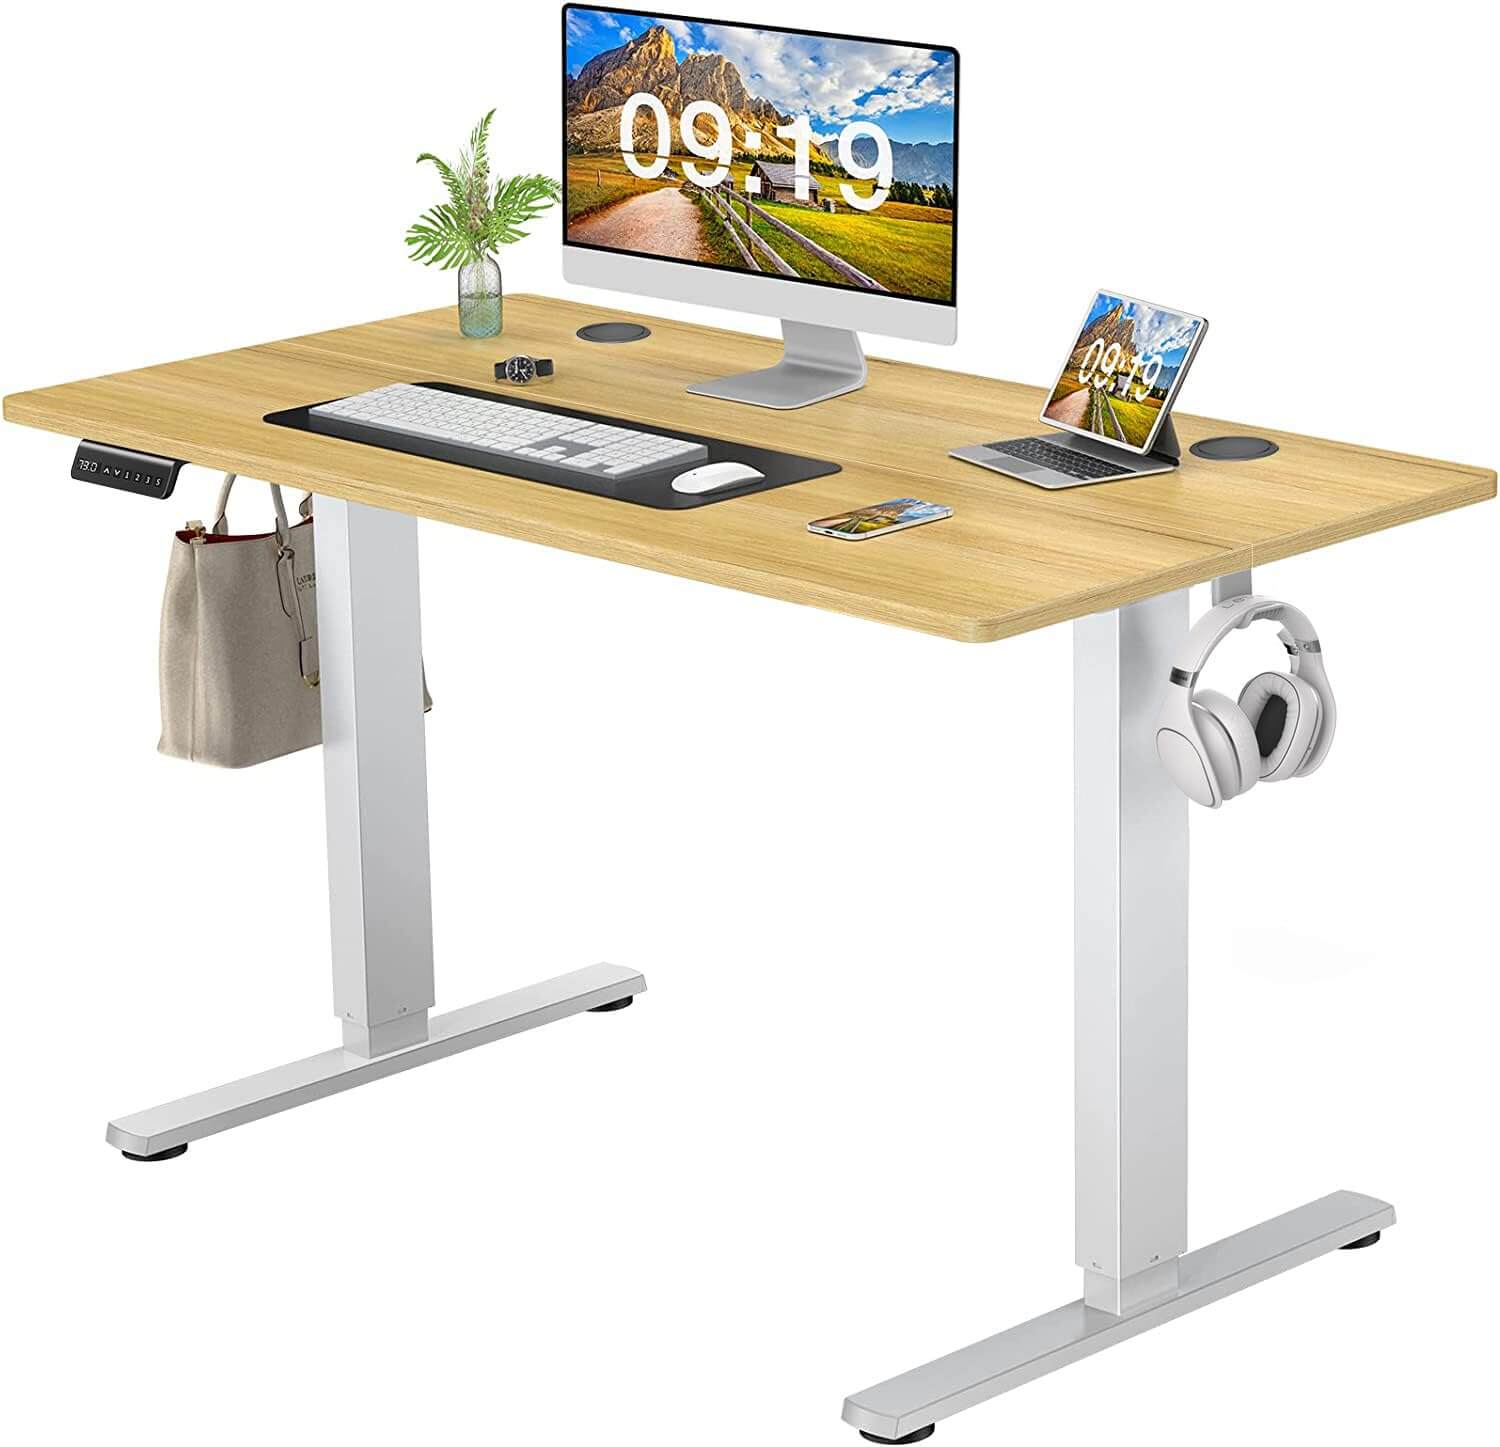 The #1 Standing Desk